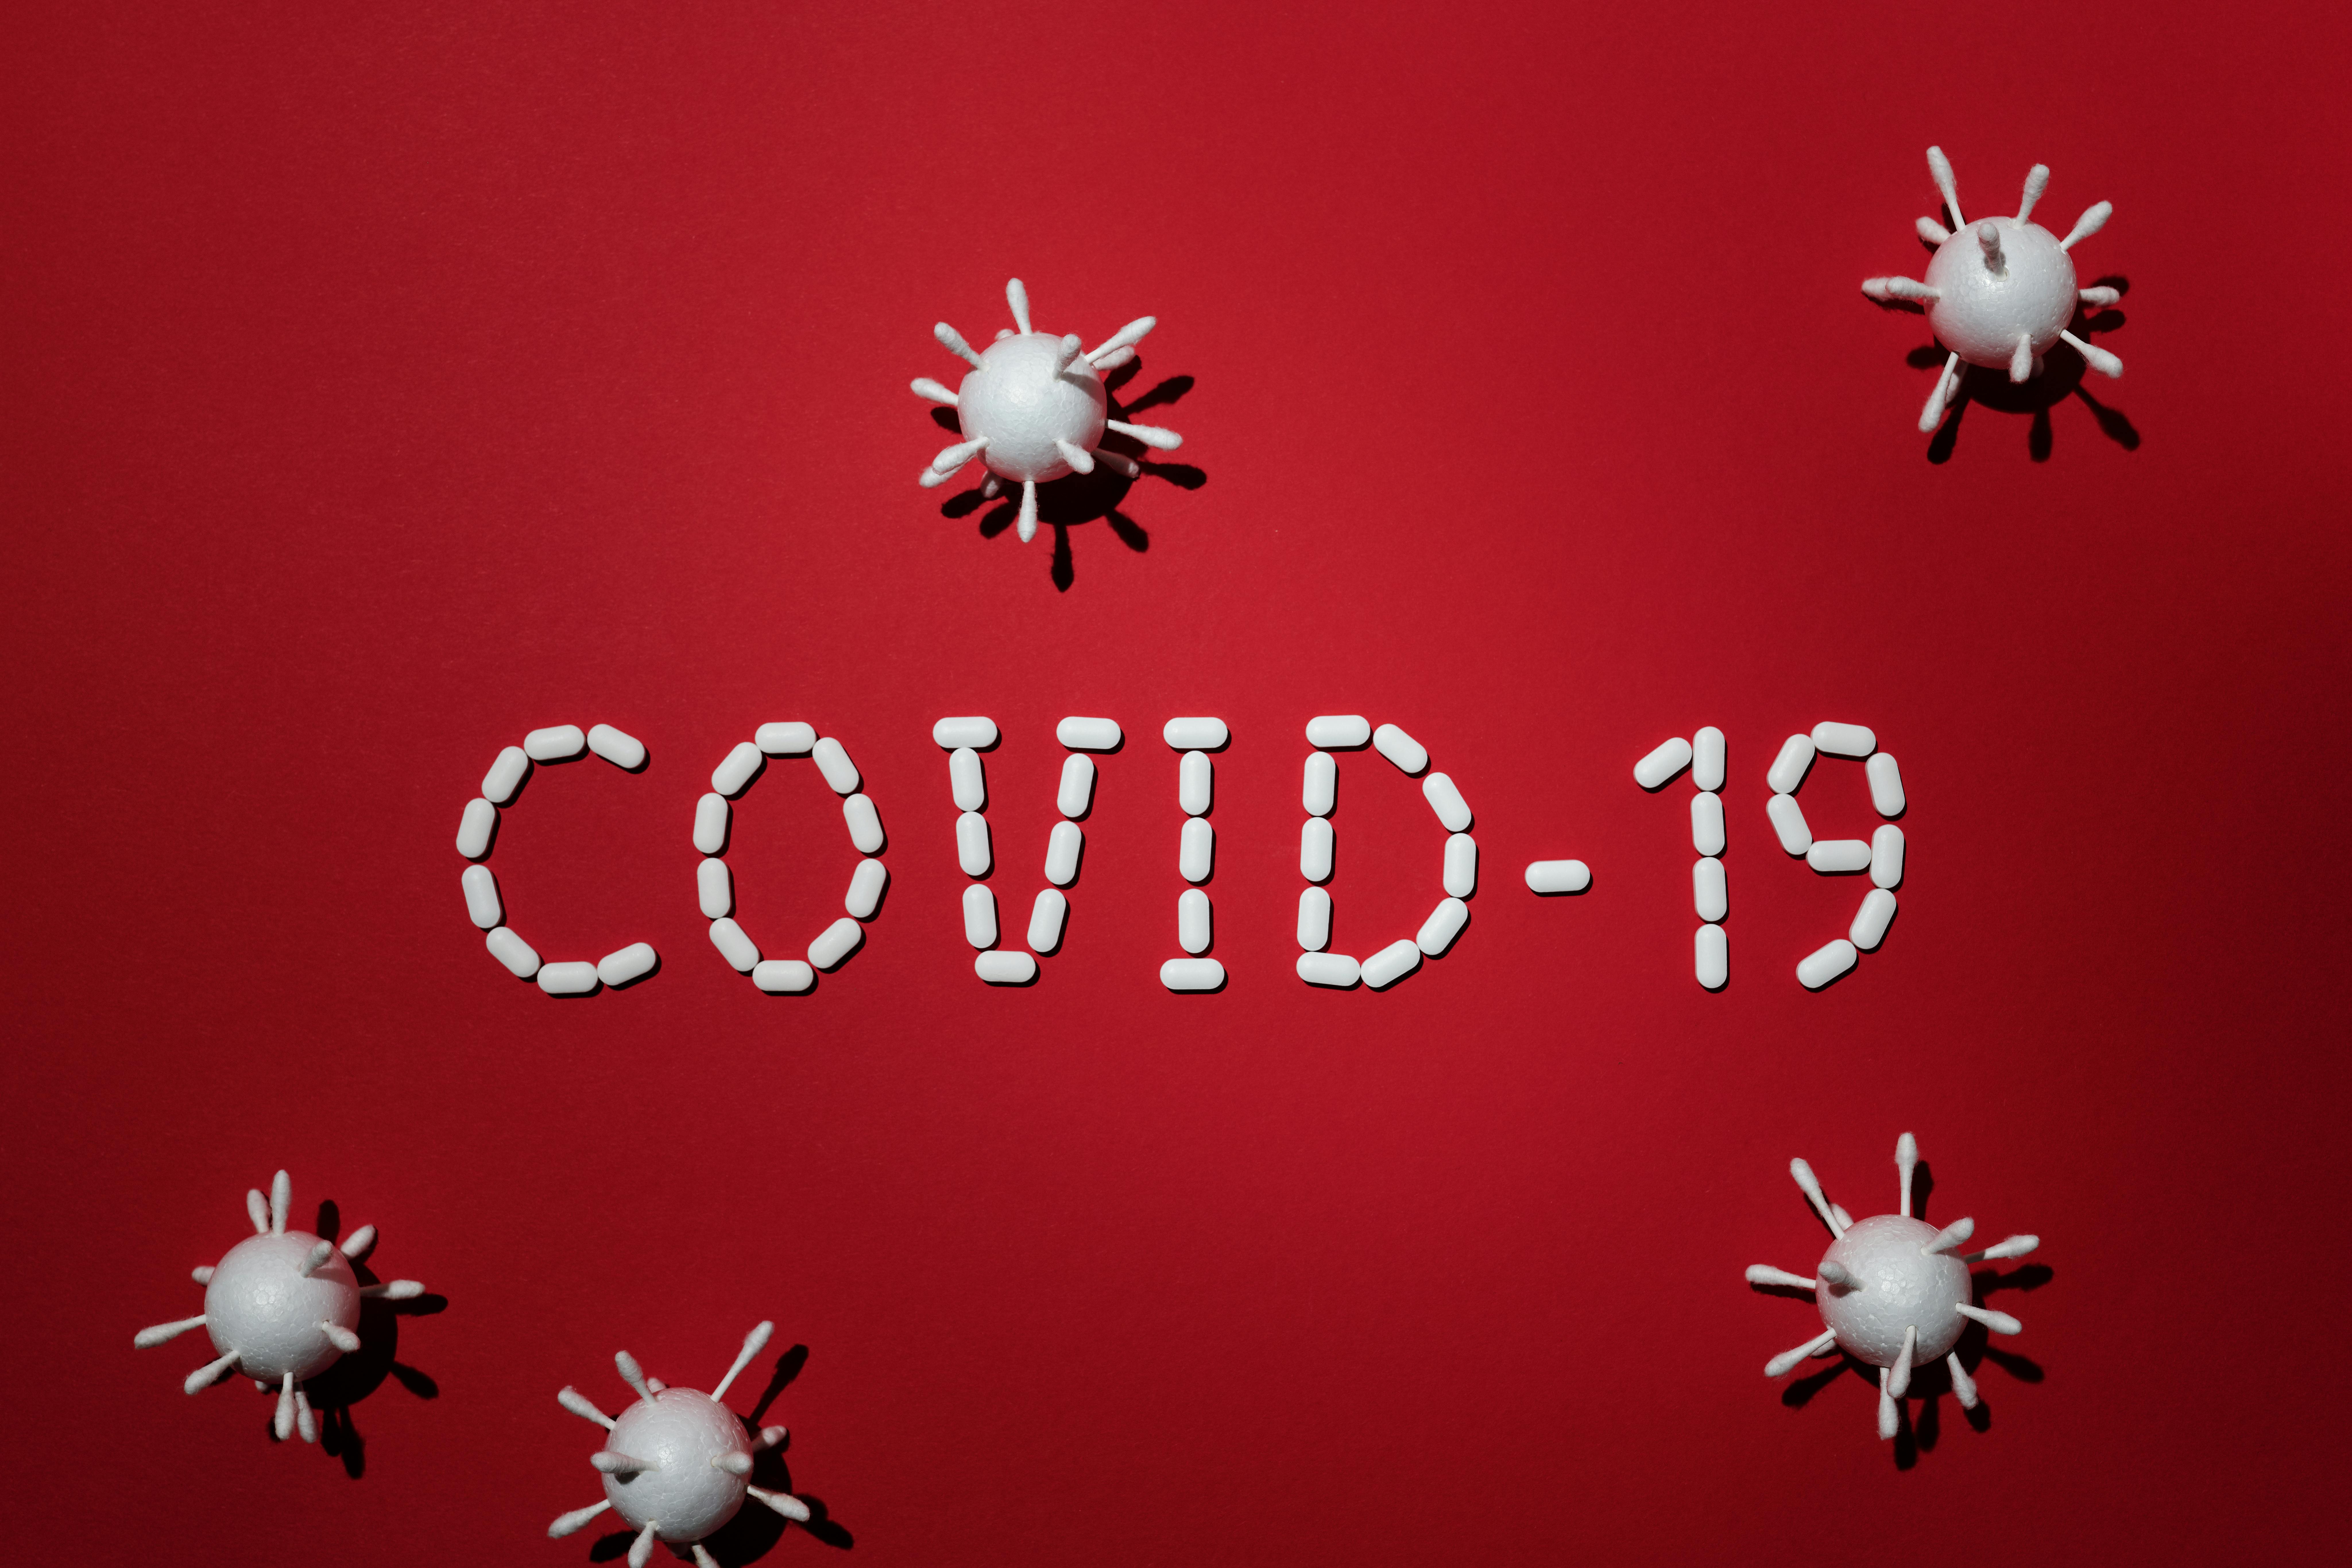 COVID-19 and Its Far-Reaching Effects on the Global Economy